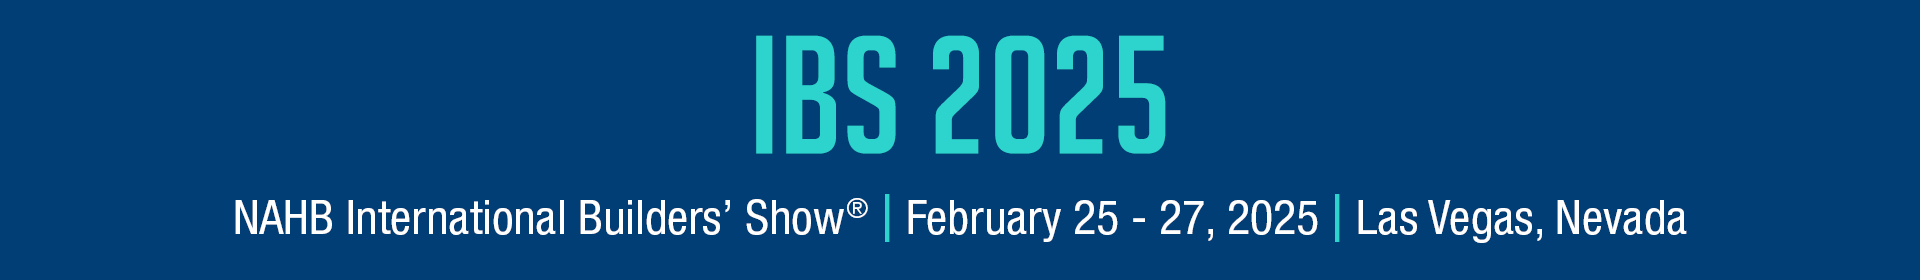 IBS 2025 | Classroom Education Event Banner